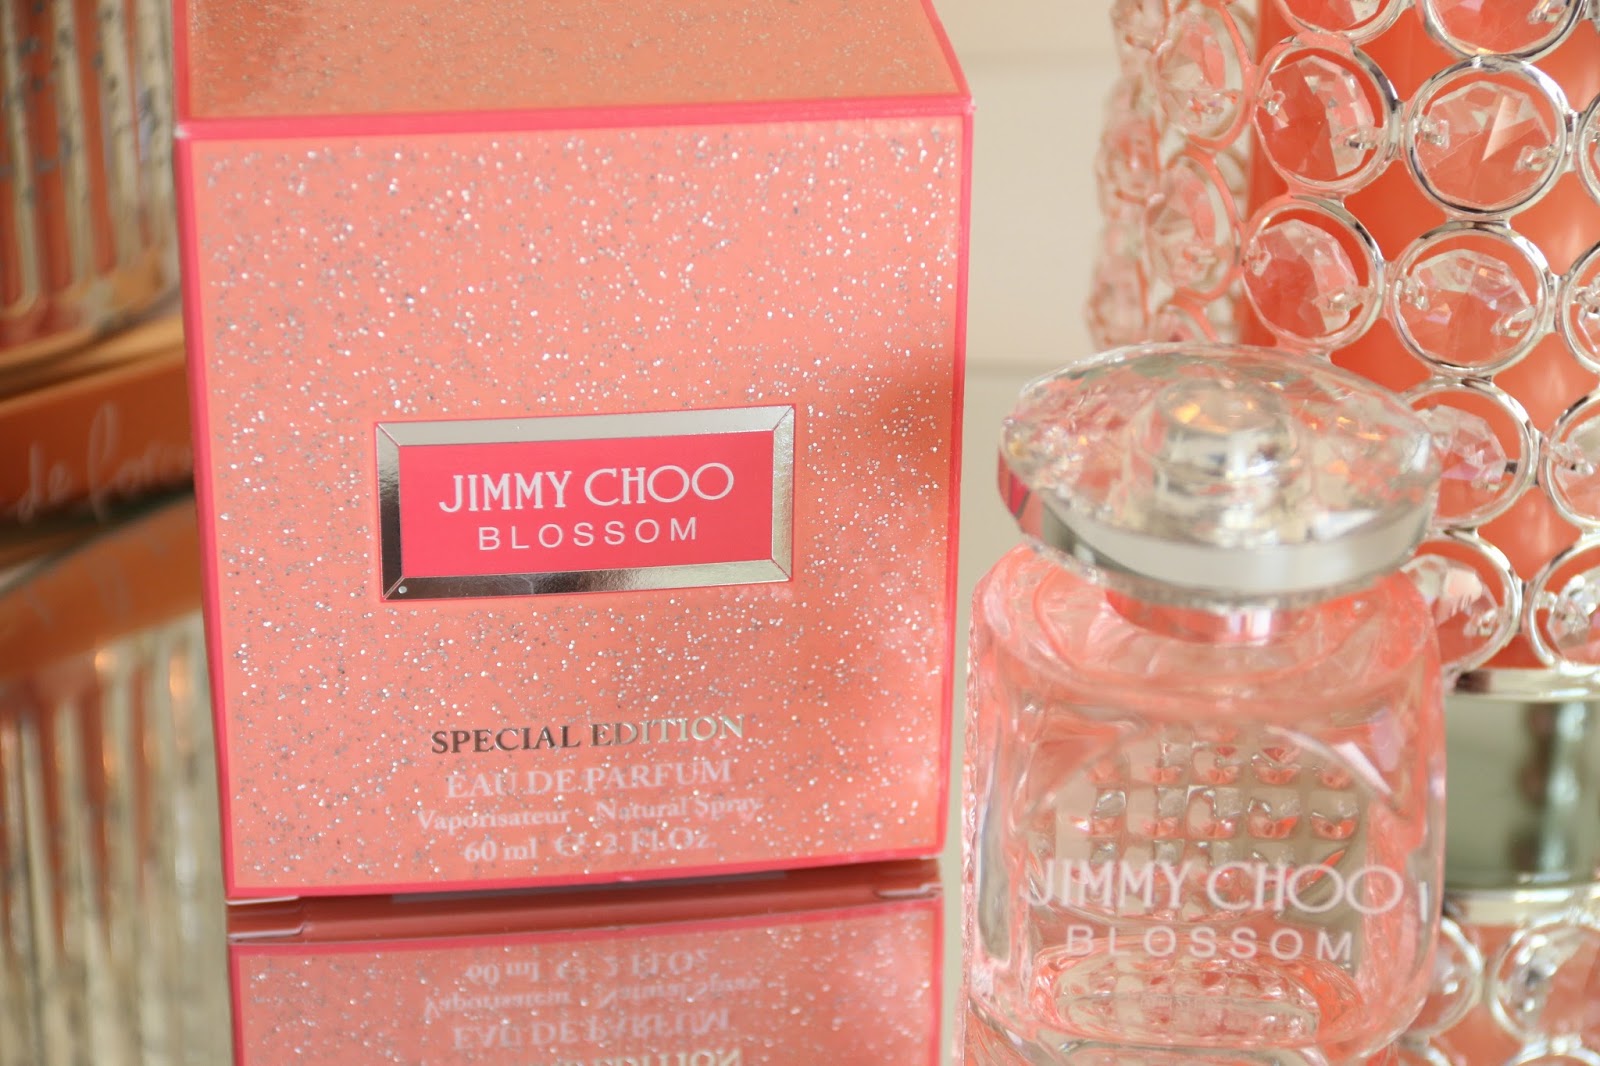 Jimmy Choo Blossom Special Edition EDP For Her Fragrance Review WhatLauraLoves